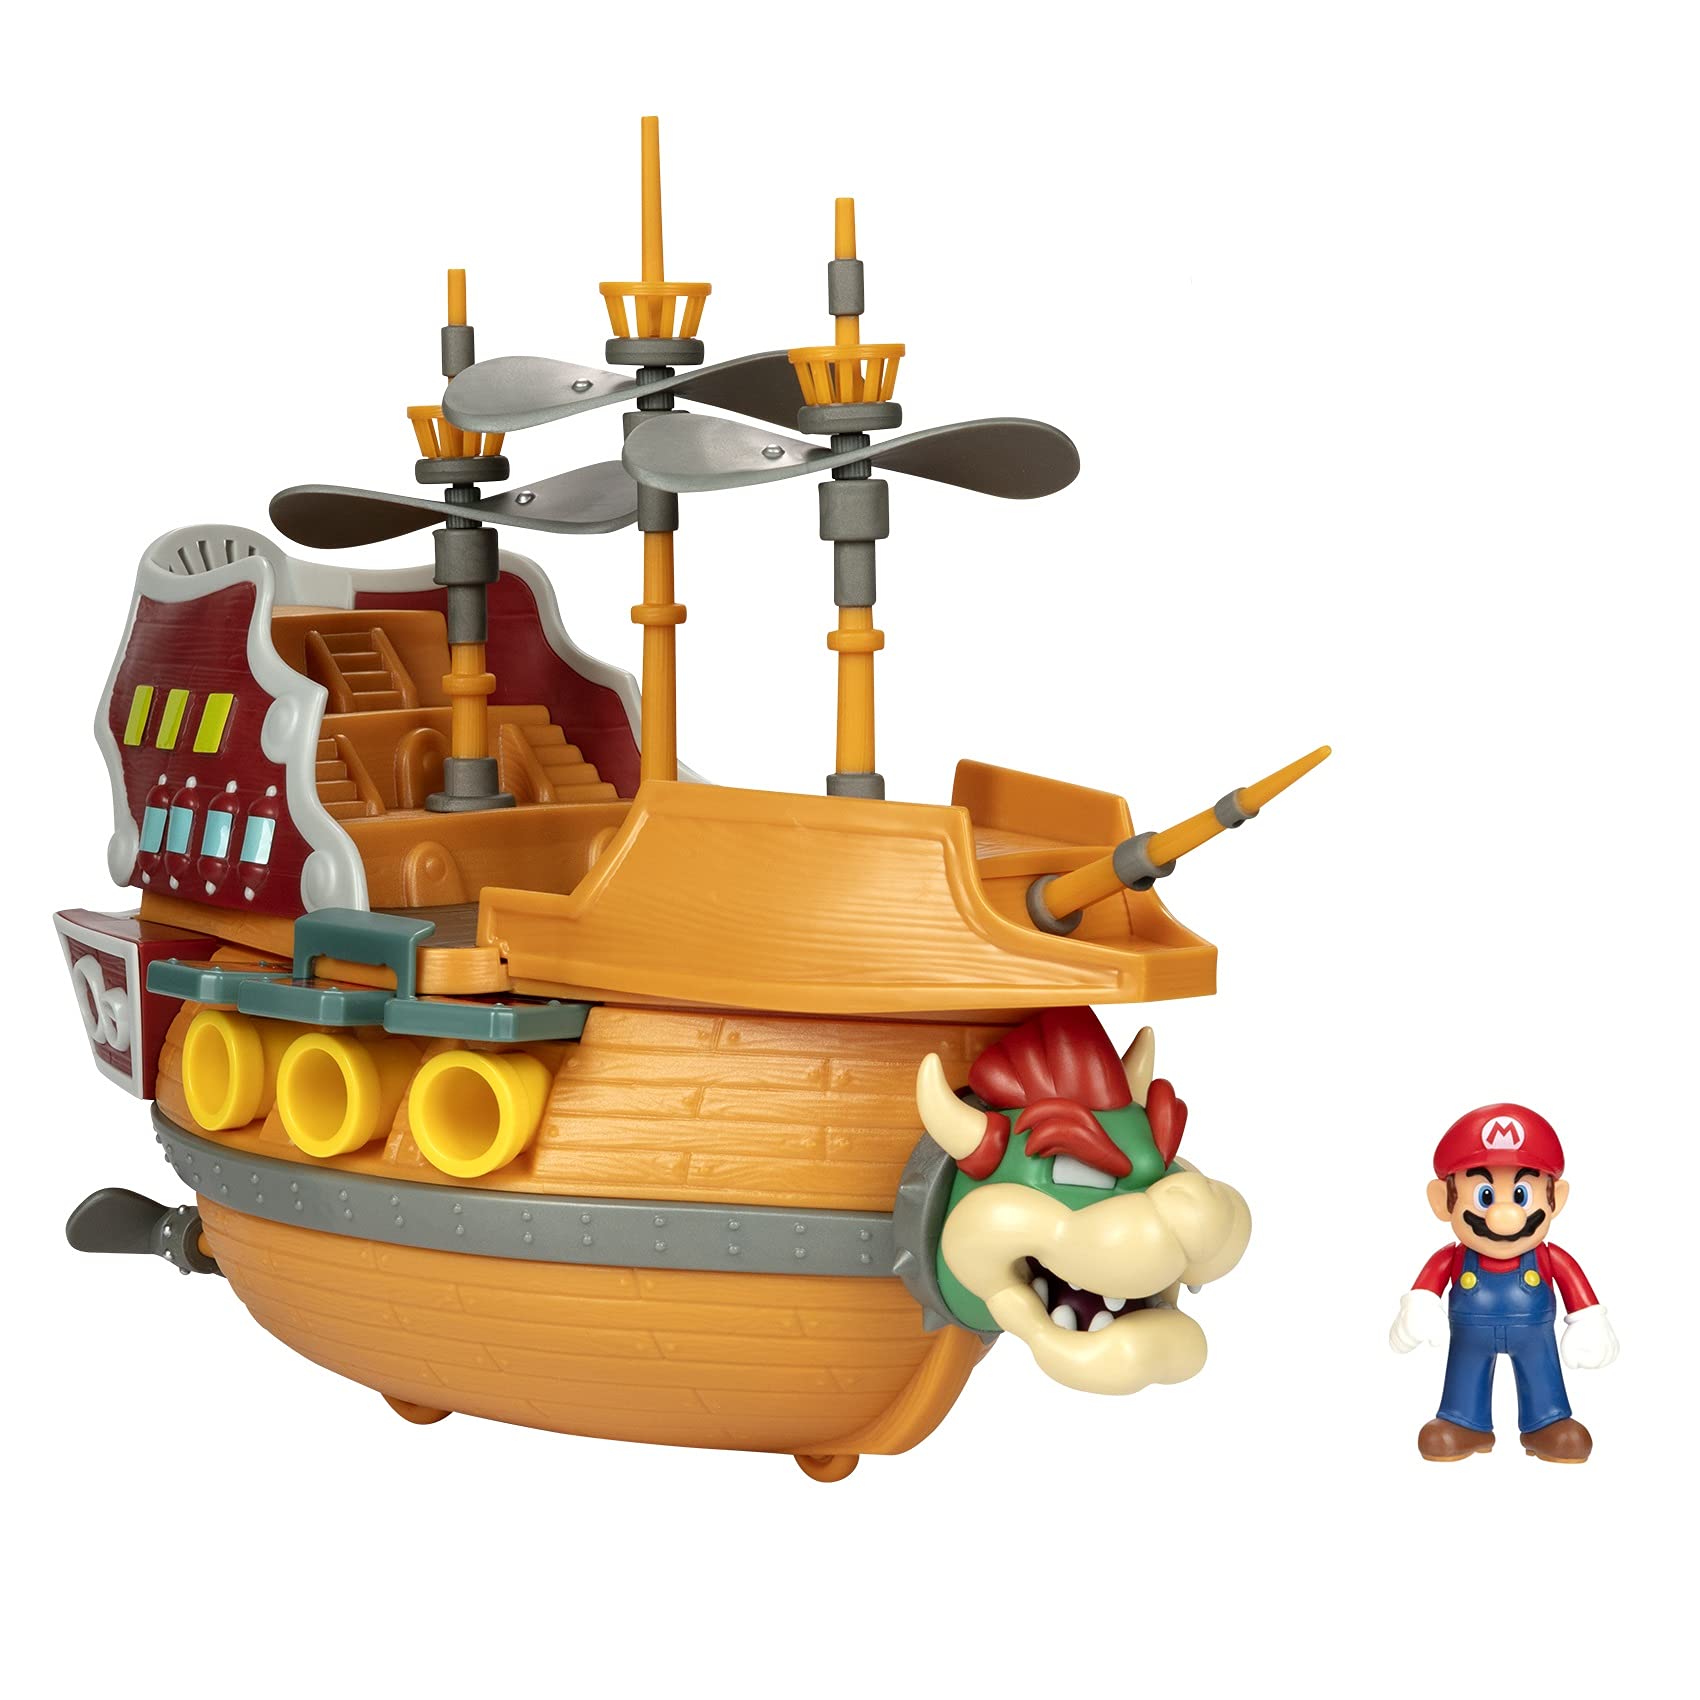 Super Mario Deluxe Bowser's Air Ship Playset w/ 2.5" Mario Action Figure $18 + Free Shipping w/ Prime or on $35+